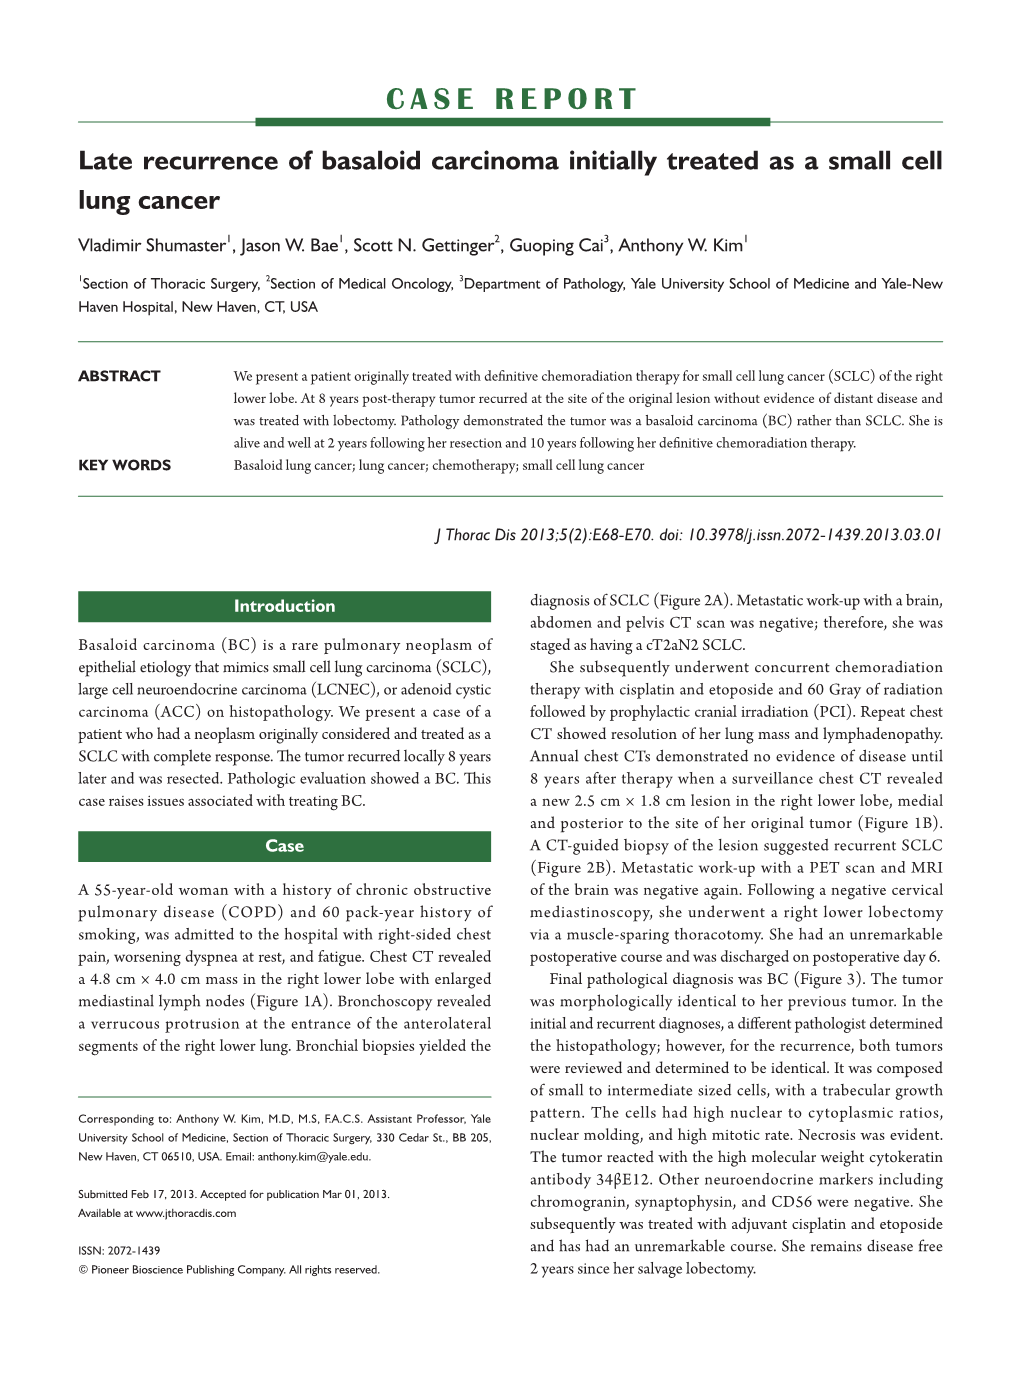 Late Recurrence of Basaloid Carcinoma Initially Treated As a Small Cell Lung Cancer